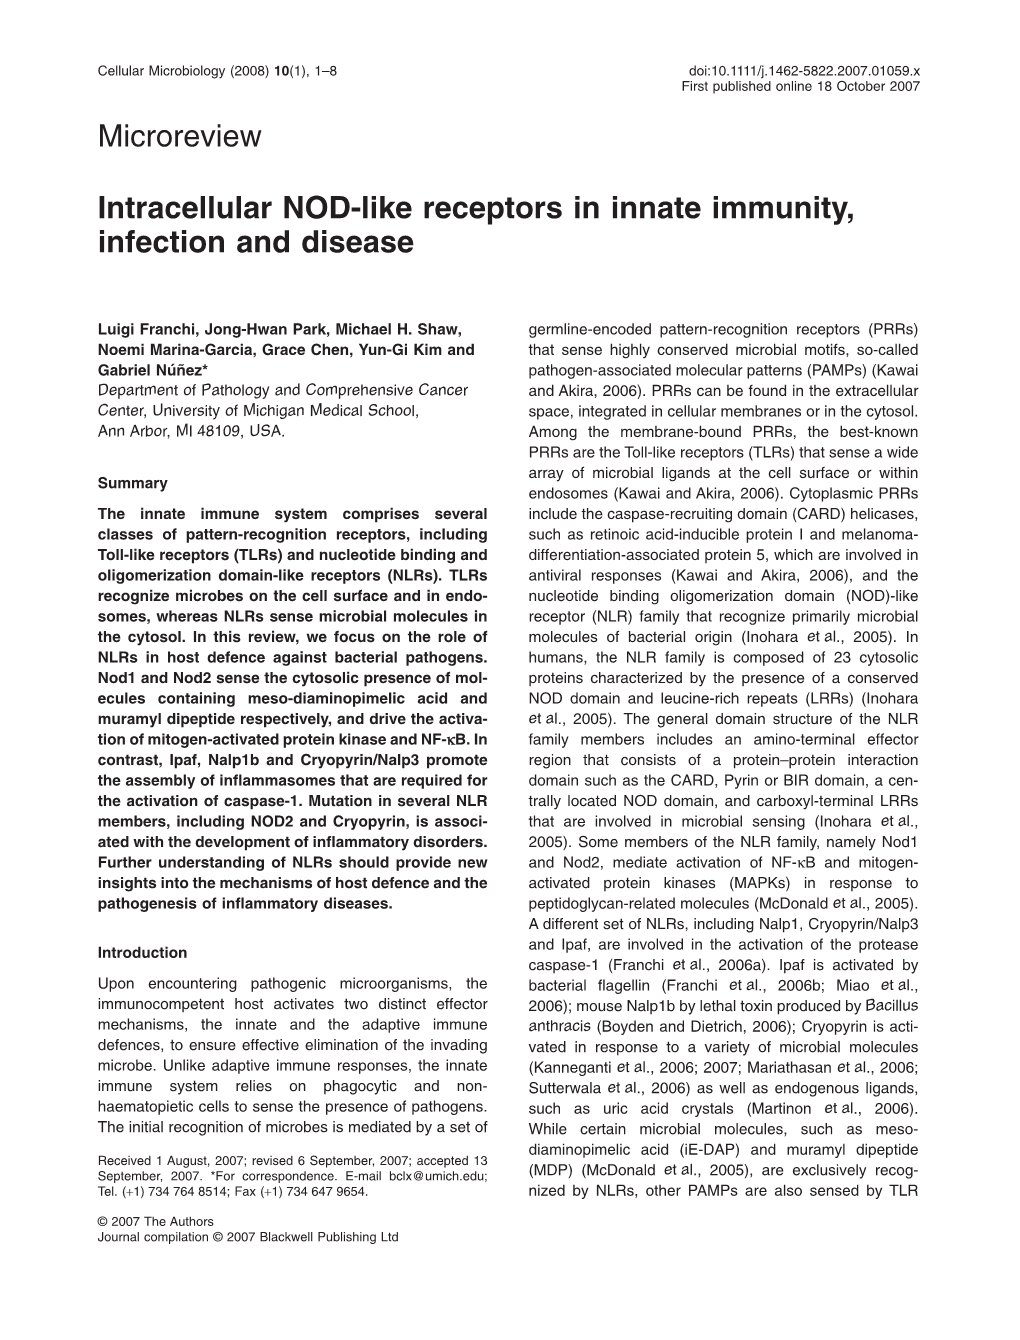 Intracellular NOD-Like Receptors in Innate Immunity, Infection and Disease